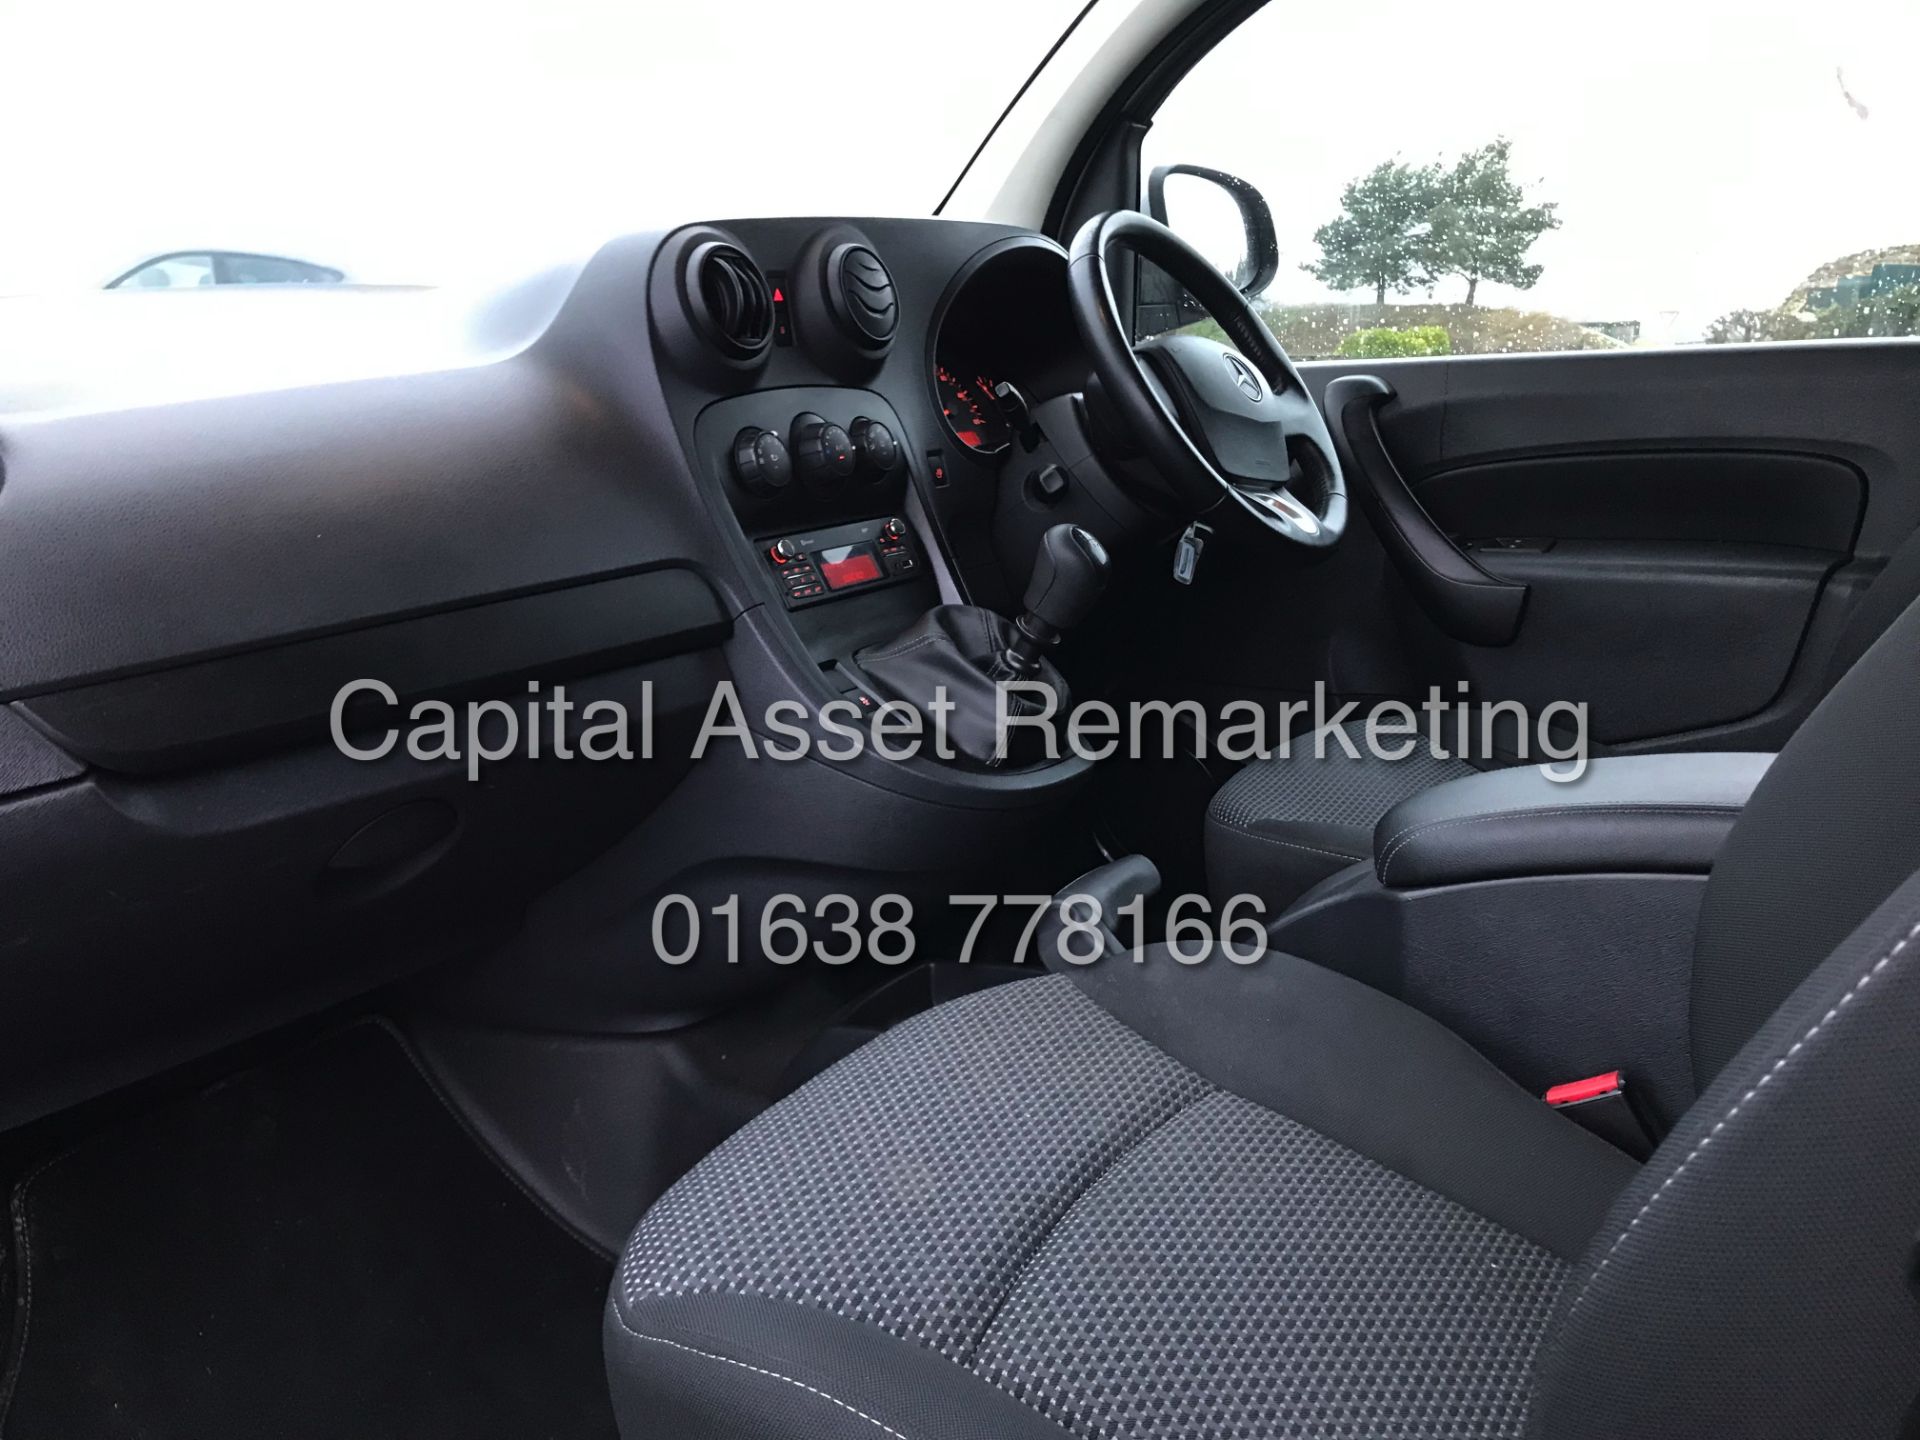 MERCEDES CITAN 111CDI "SPORT" LWB (16 REG) 1 OWNER-AIR CON-6 SPEED-FULLY LOADED *VERY HARD TO FIND* - Image 17 of 18